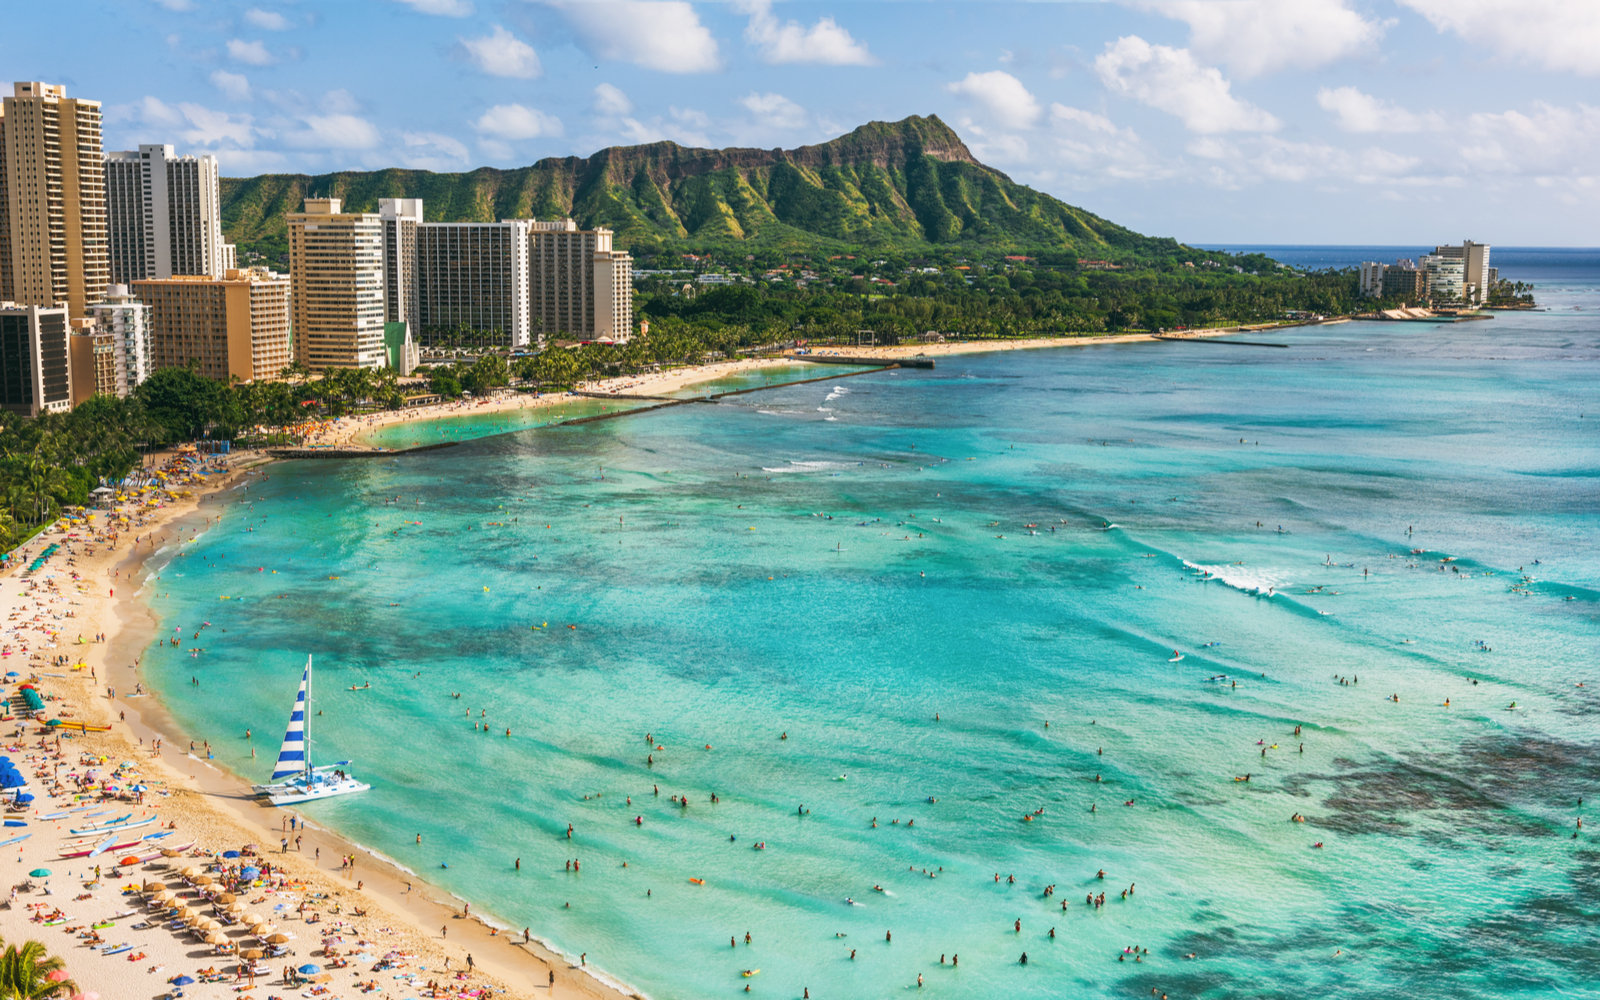 Waikiki beach pictured for a piece on the best Airbnbs in Oahu